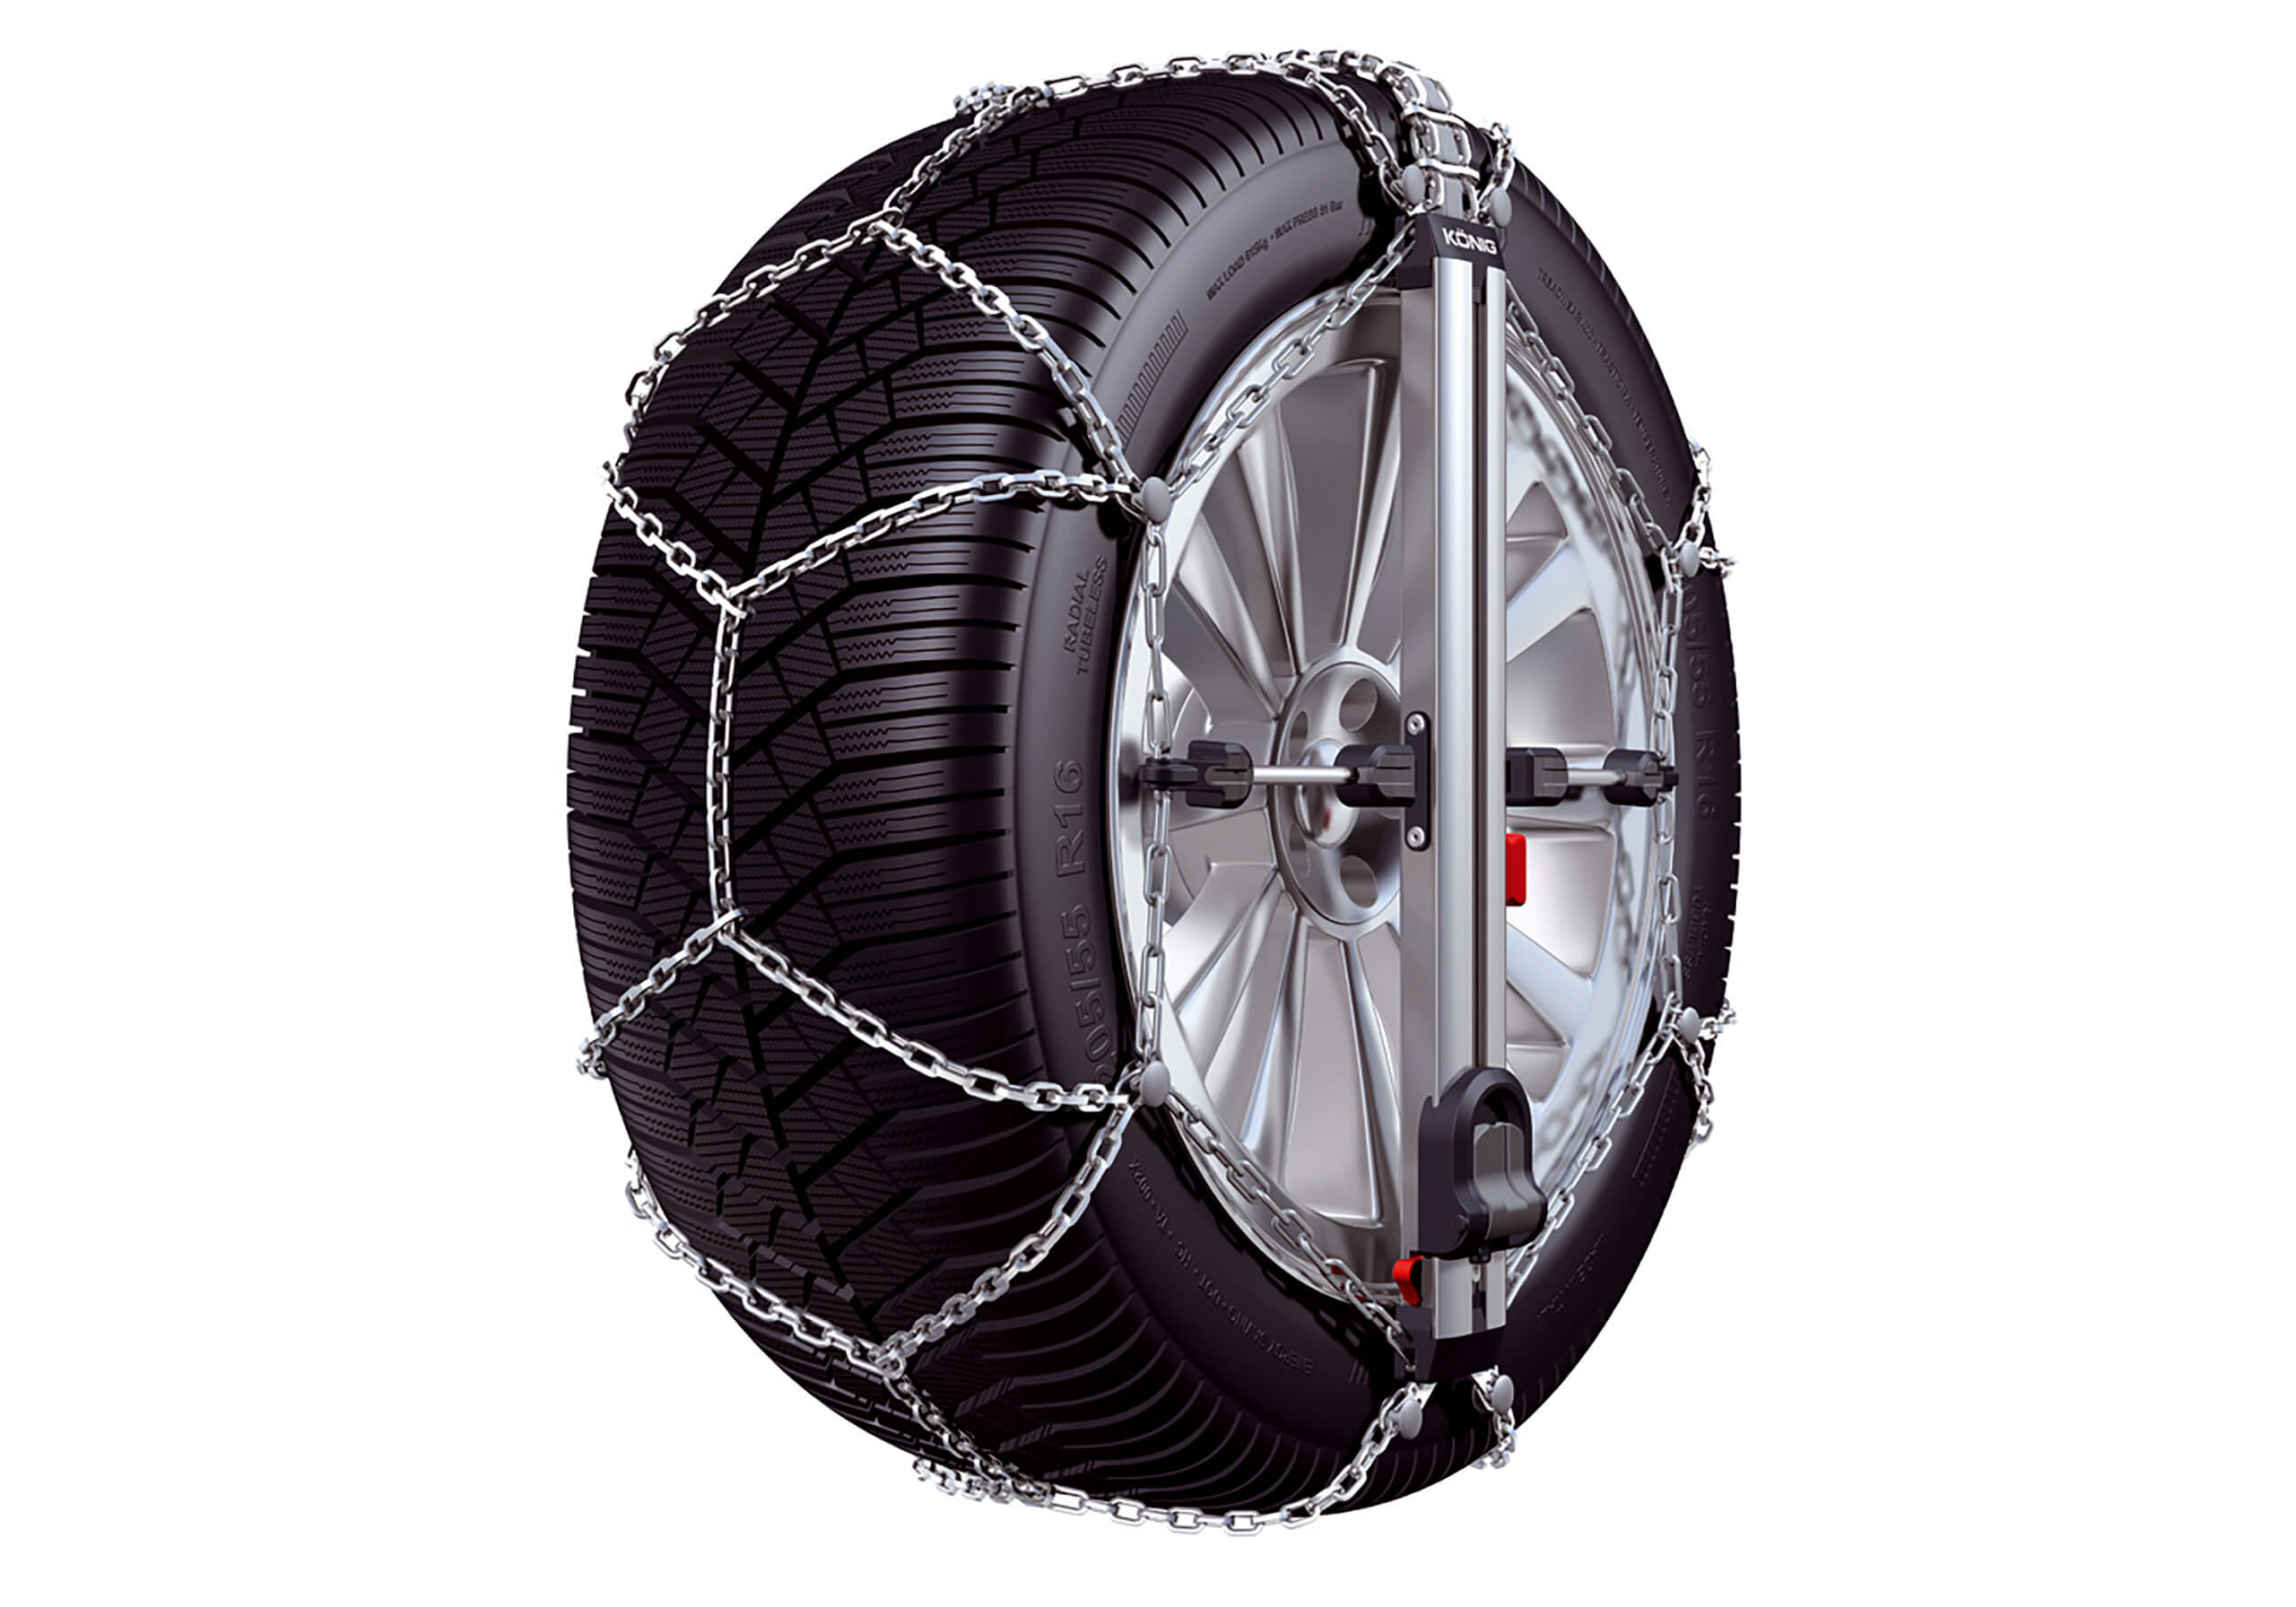 BMW 3 series Touring (2002 to 2005):Knig CU-9 Easy-fit snow chains (pair) no. KGCU-9 090